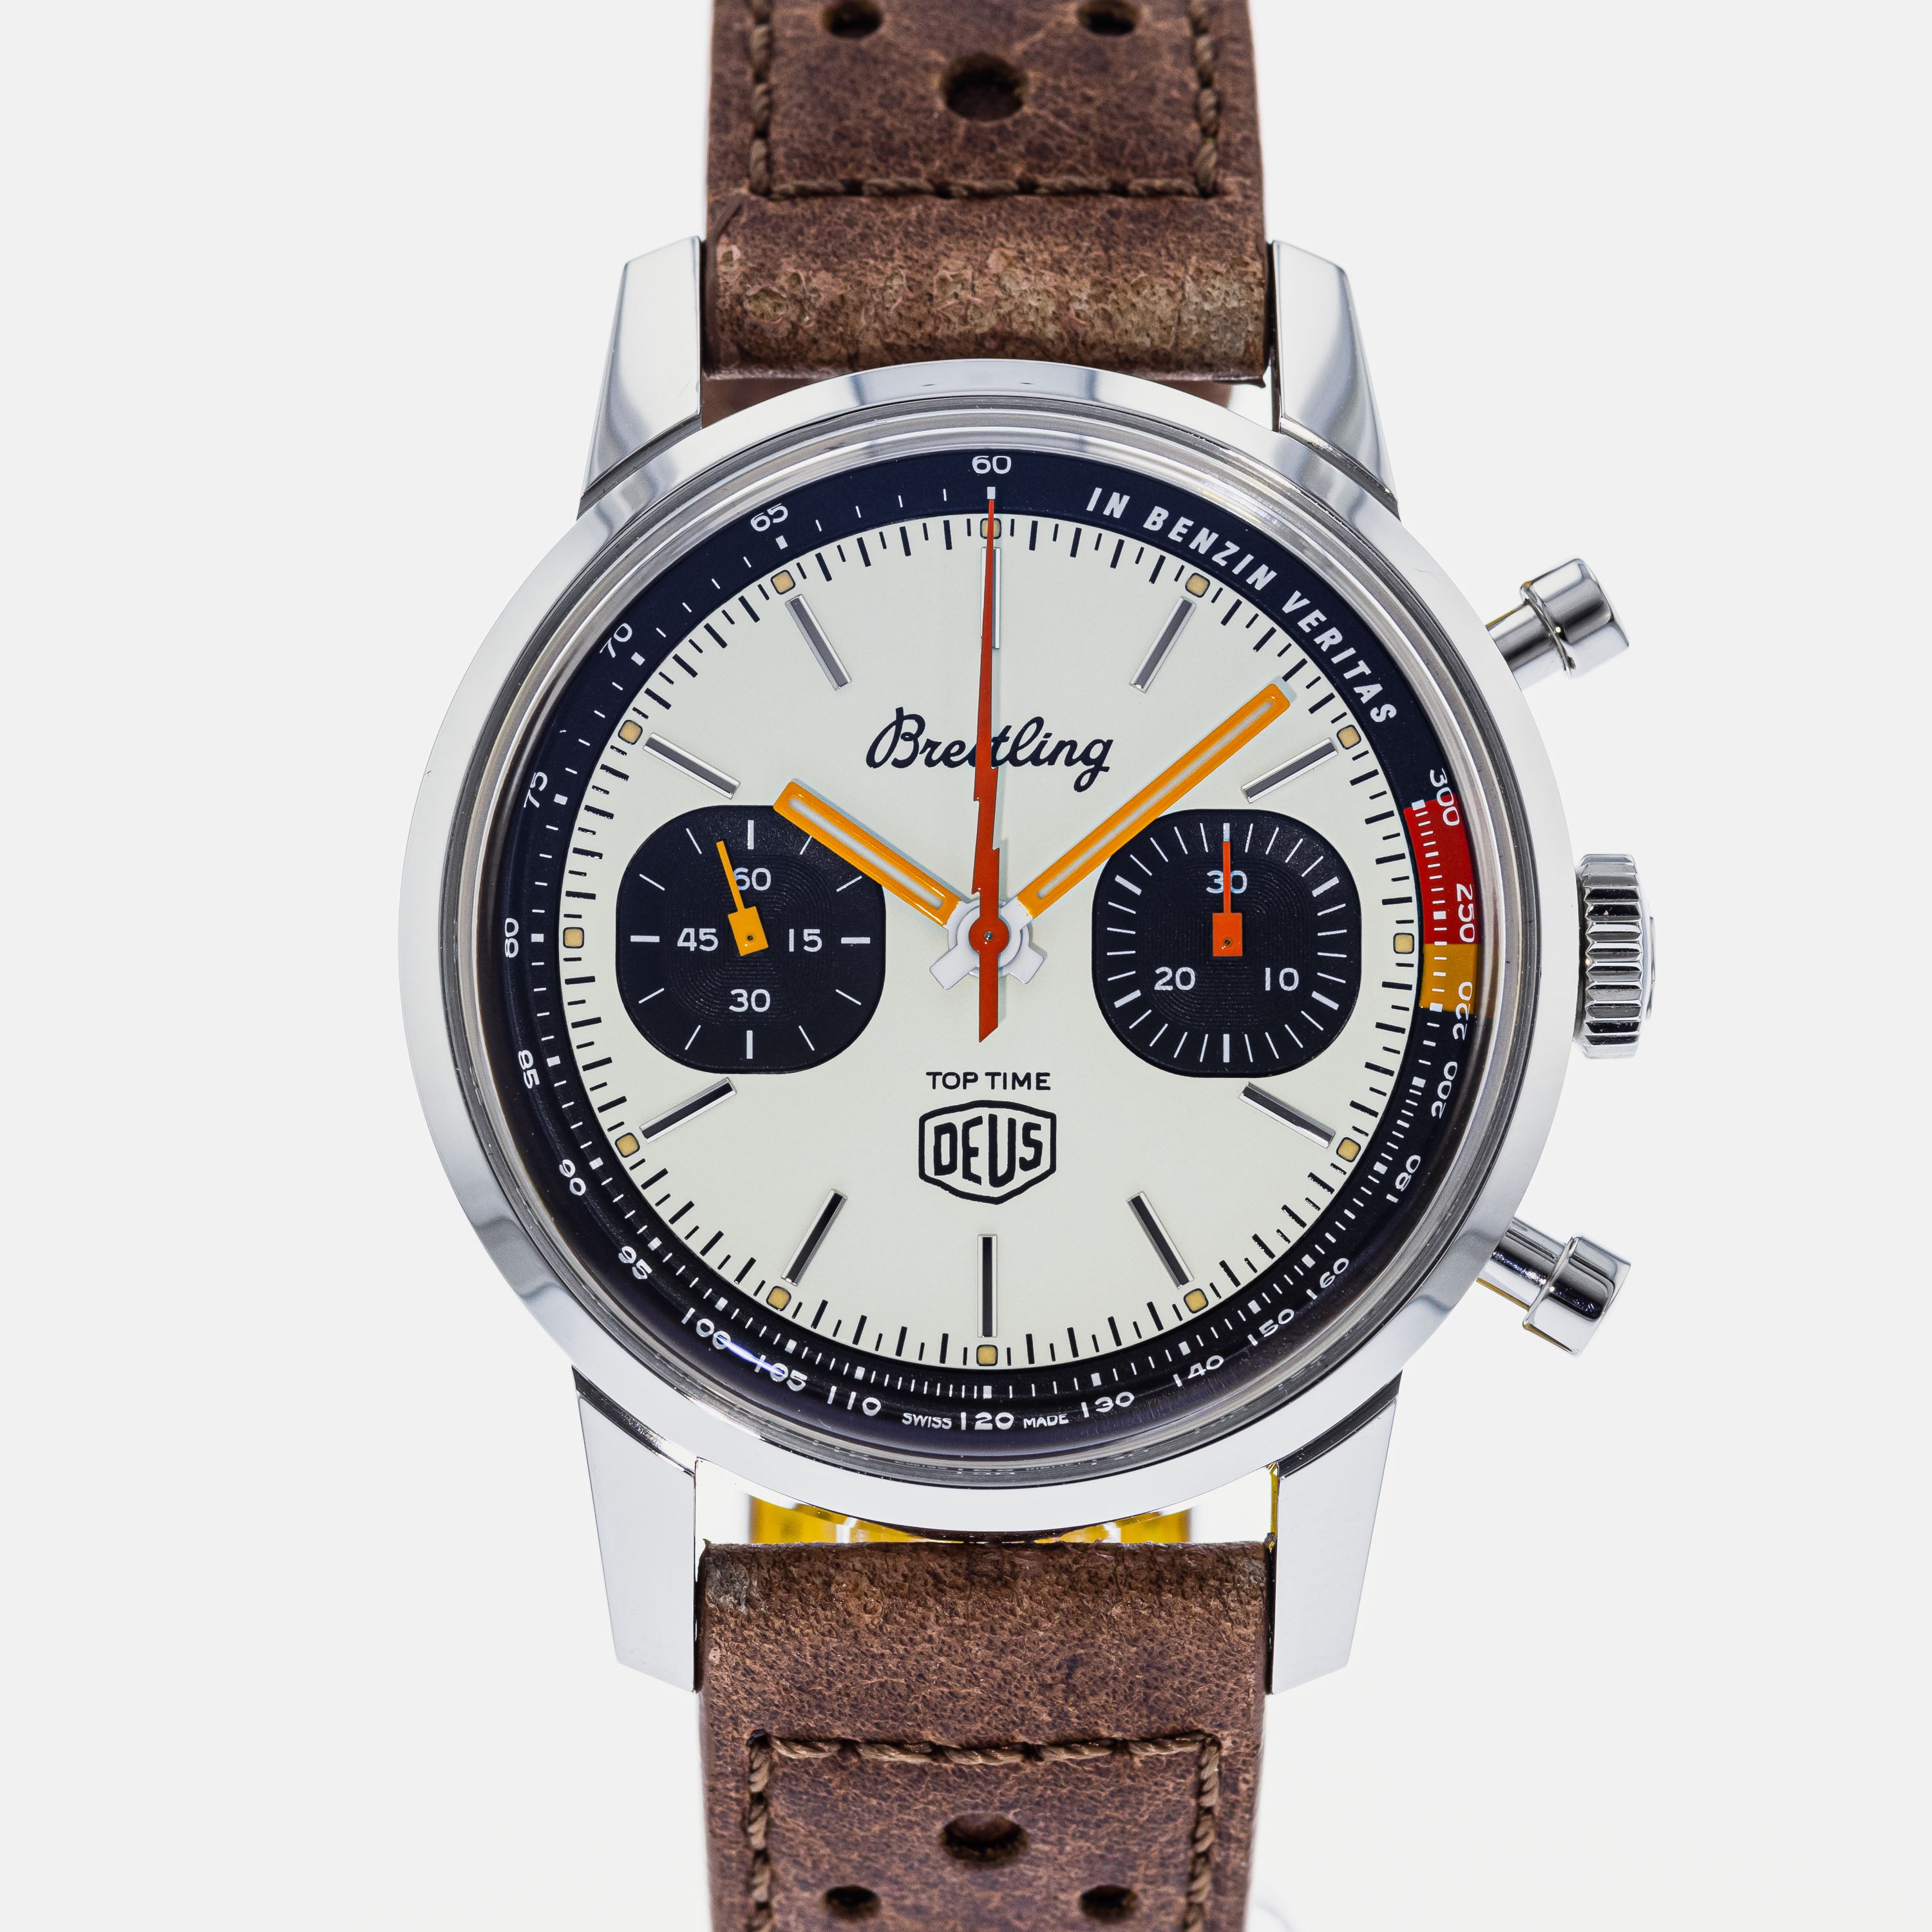 News: Presenting the Breitling Top Time Deus Chronograph Limited Edition —  WATCH COLLECTING LIFESTYLE